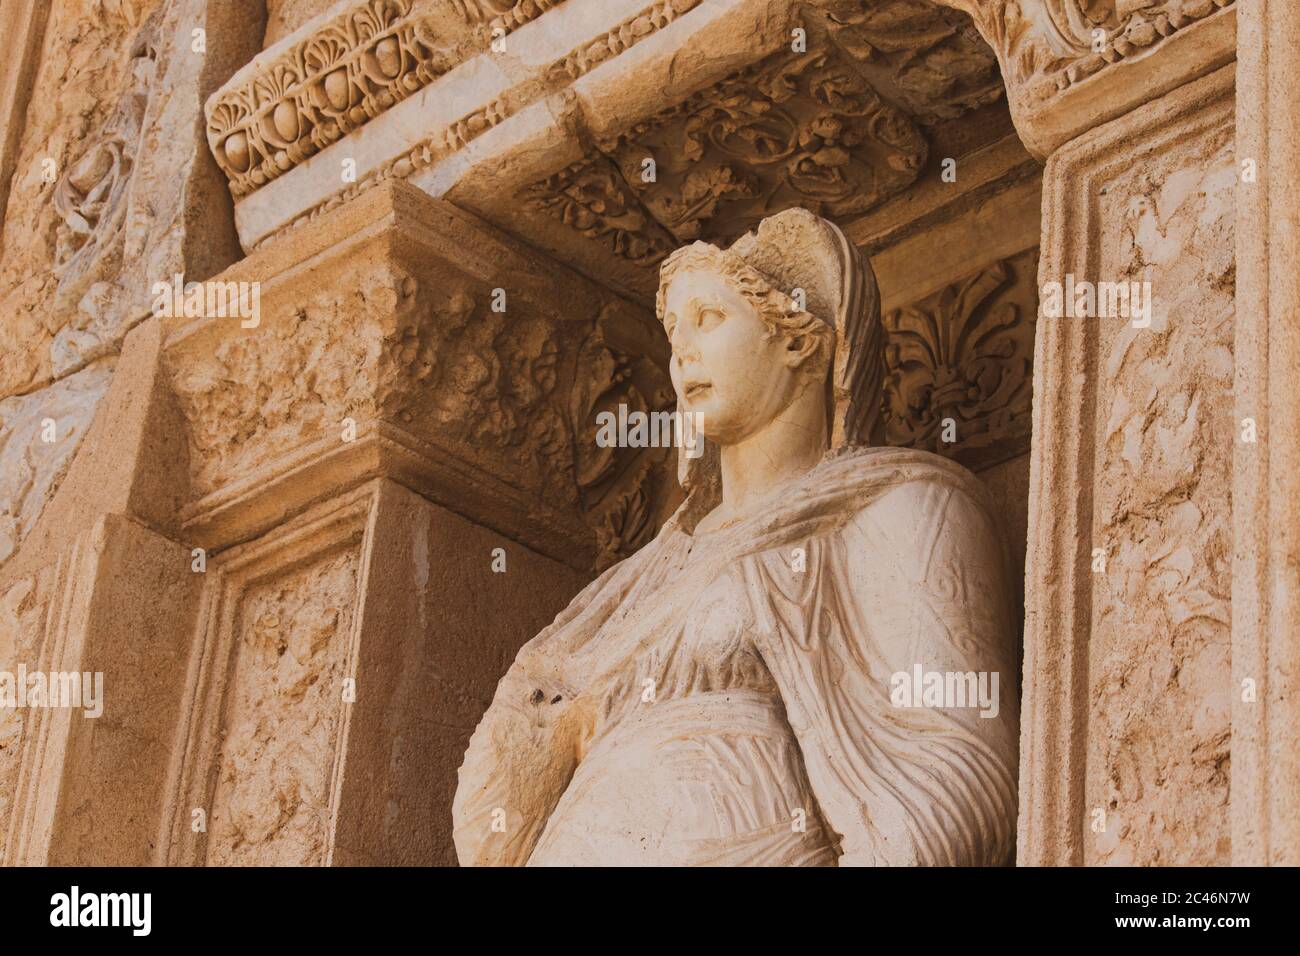 Statue of Arete (virtue/valor) which is located on the facade of library of Celsus in  Greek ancient city of Ephesus, Turkey. Stock Photo